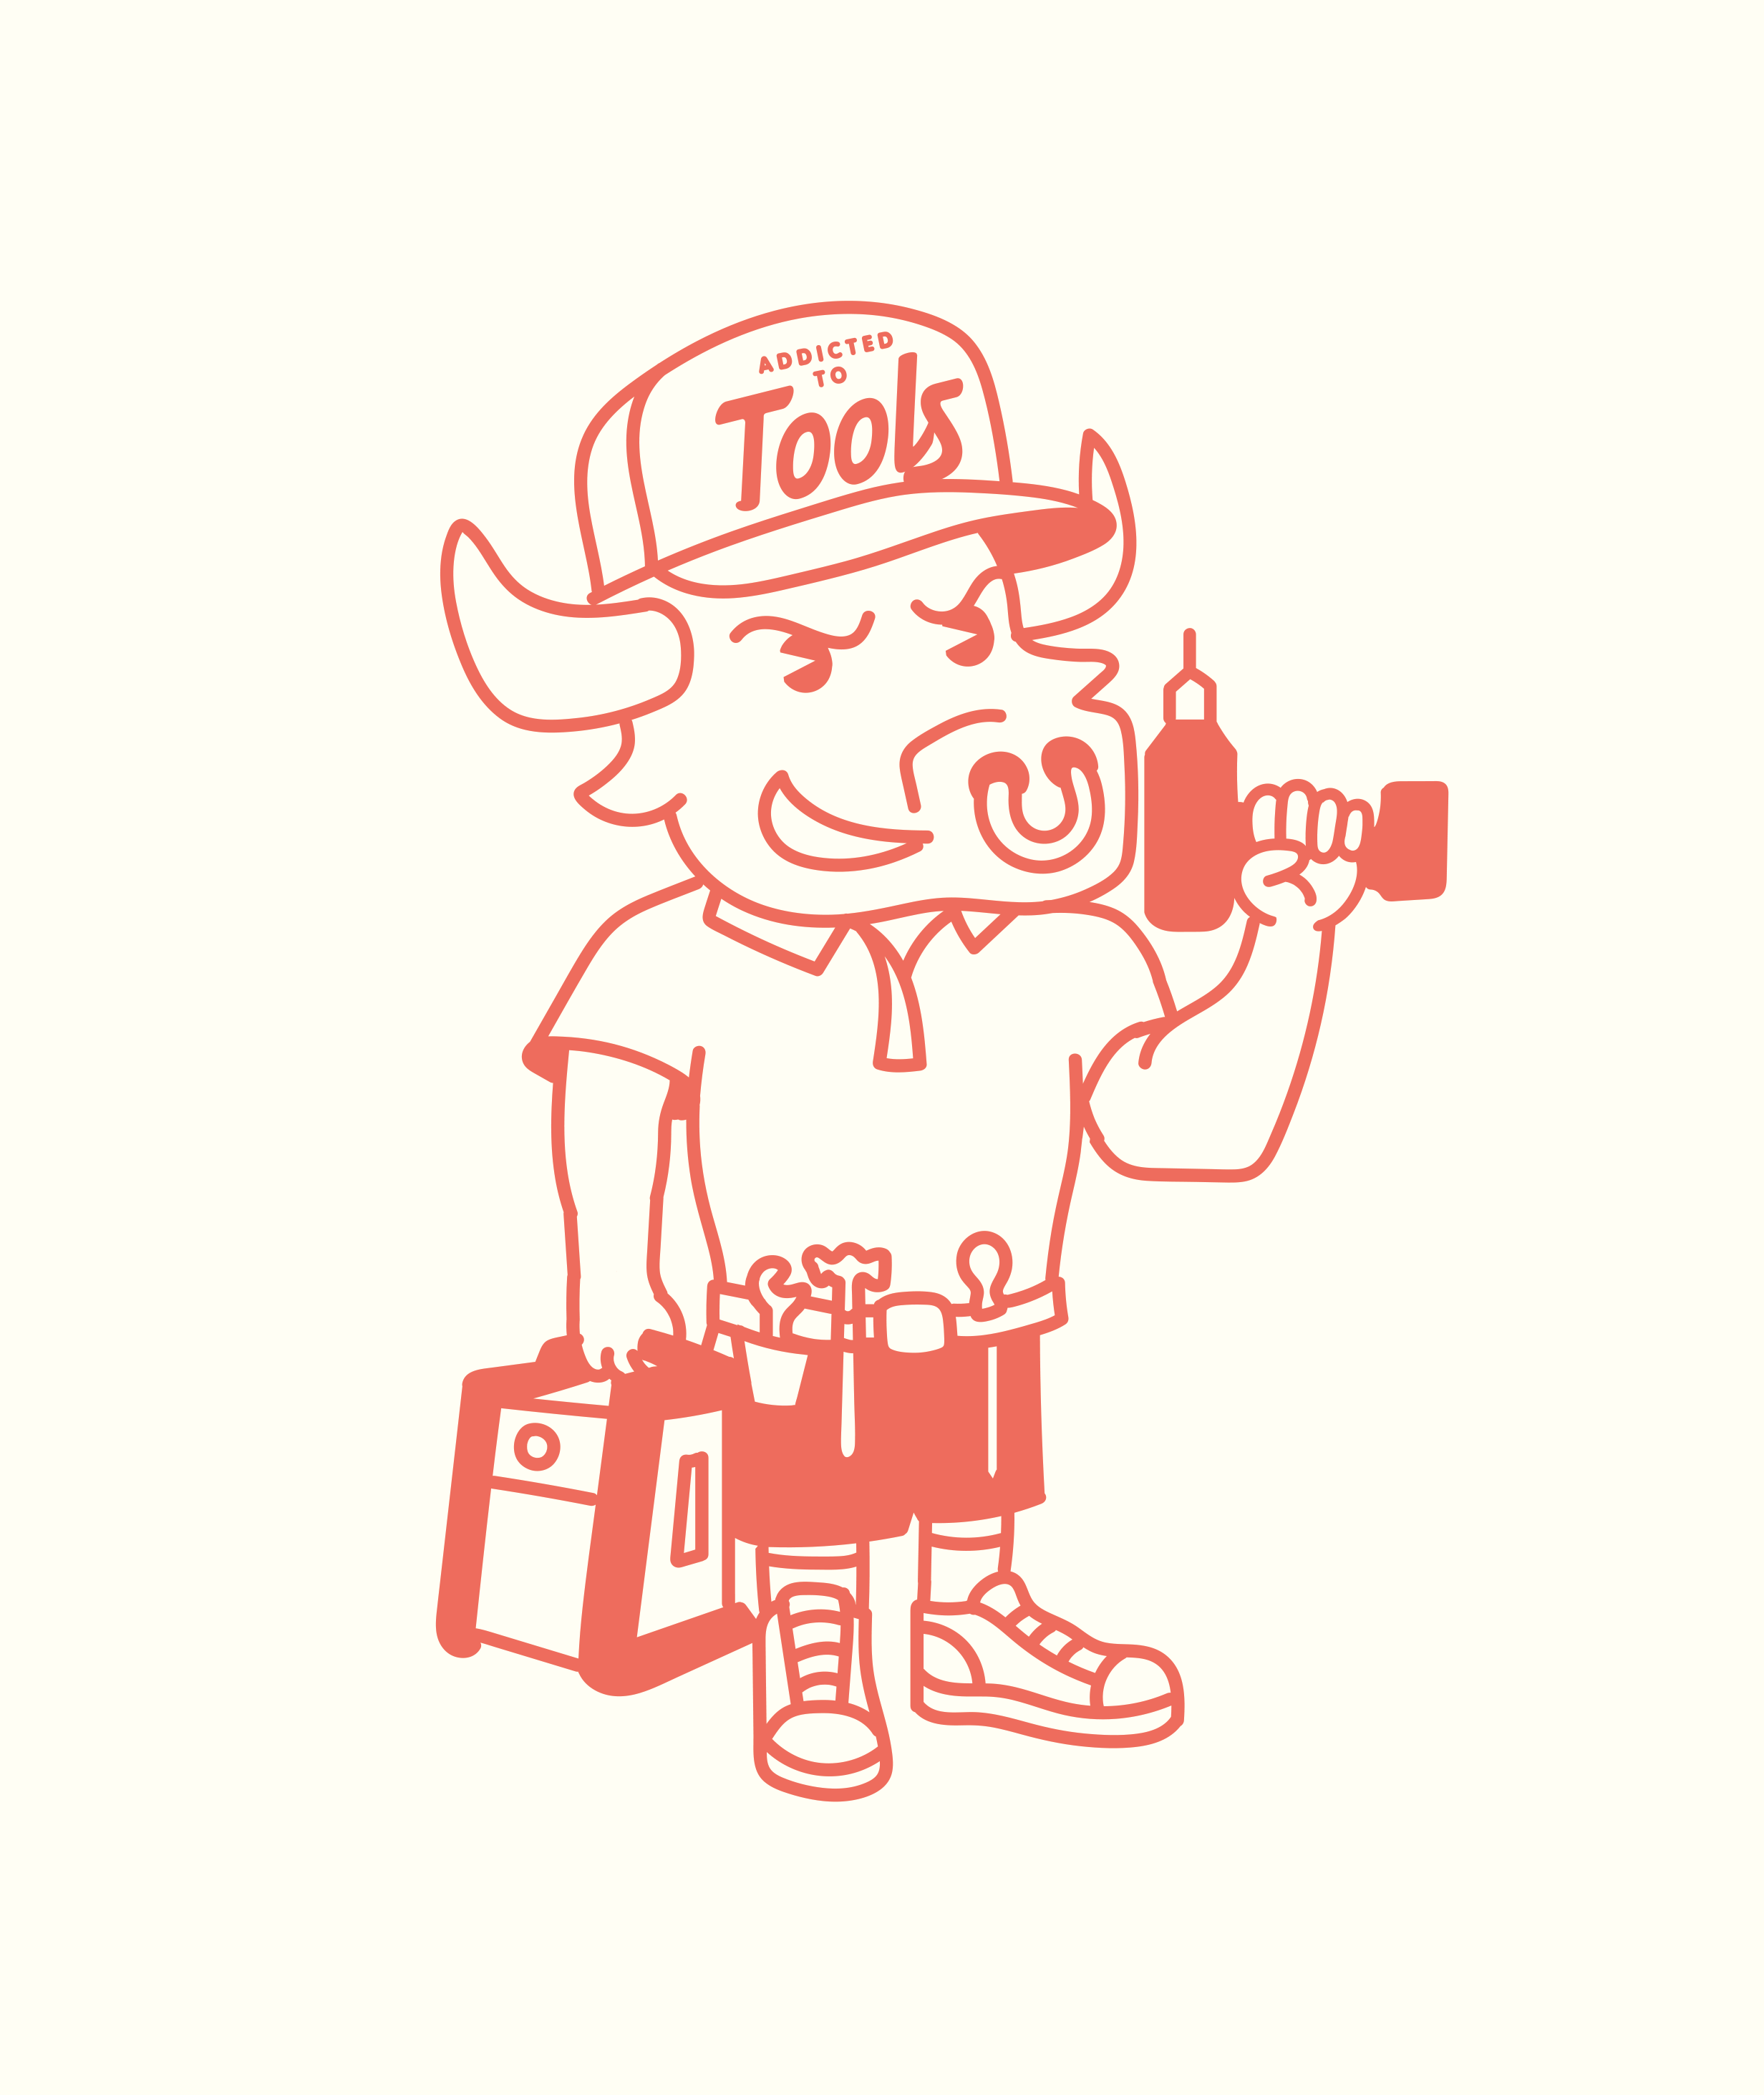 Addicted-to-Tools.png